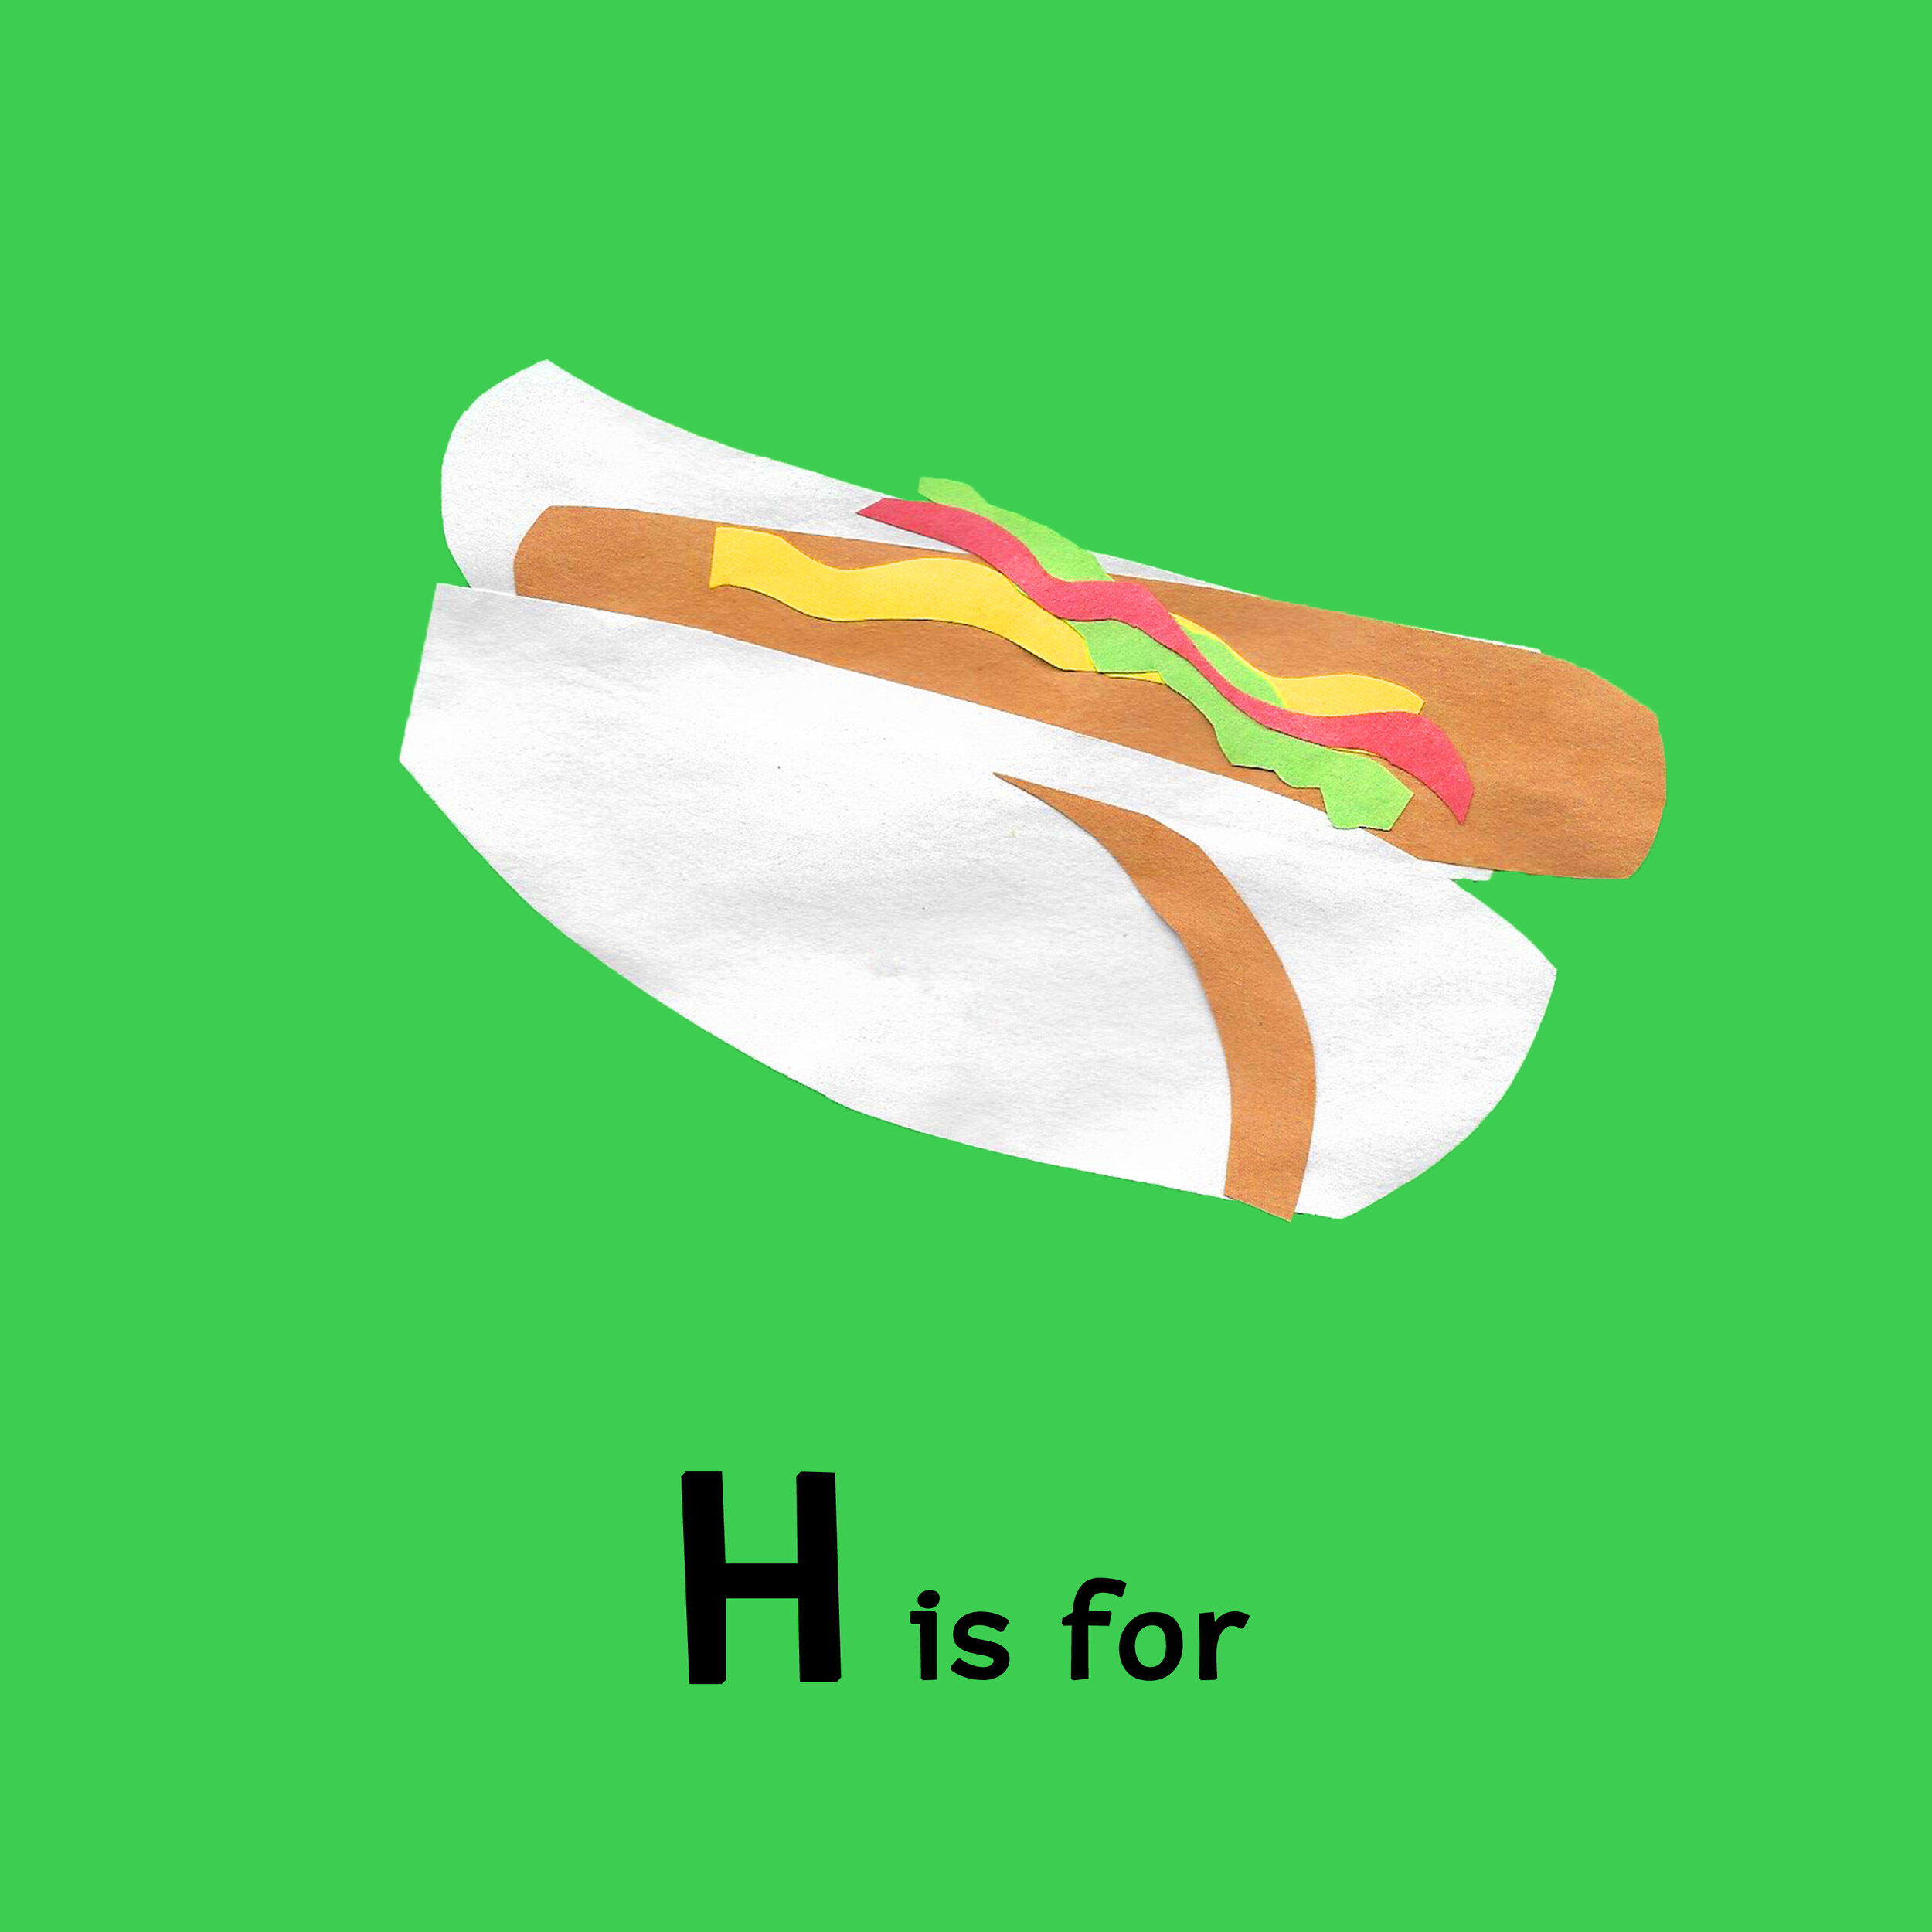 H is for.jpg